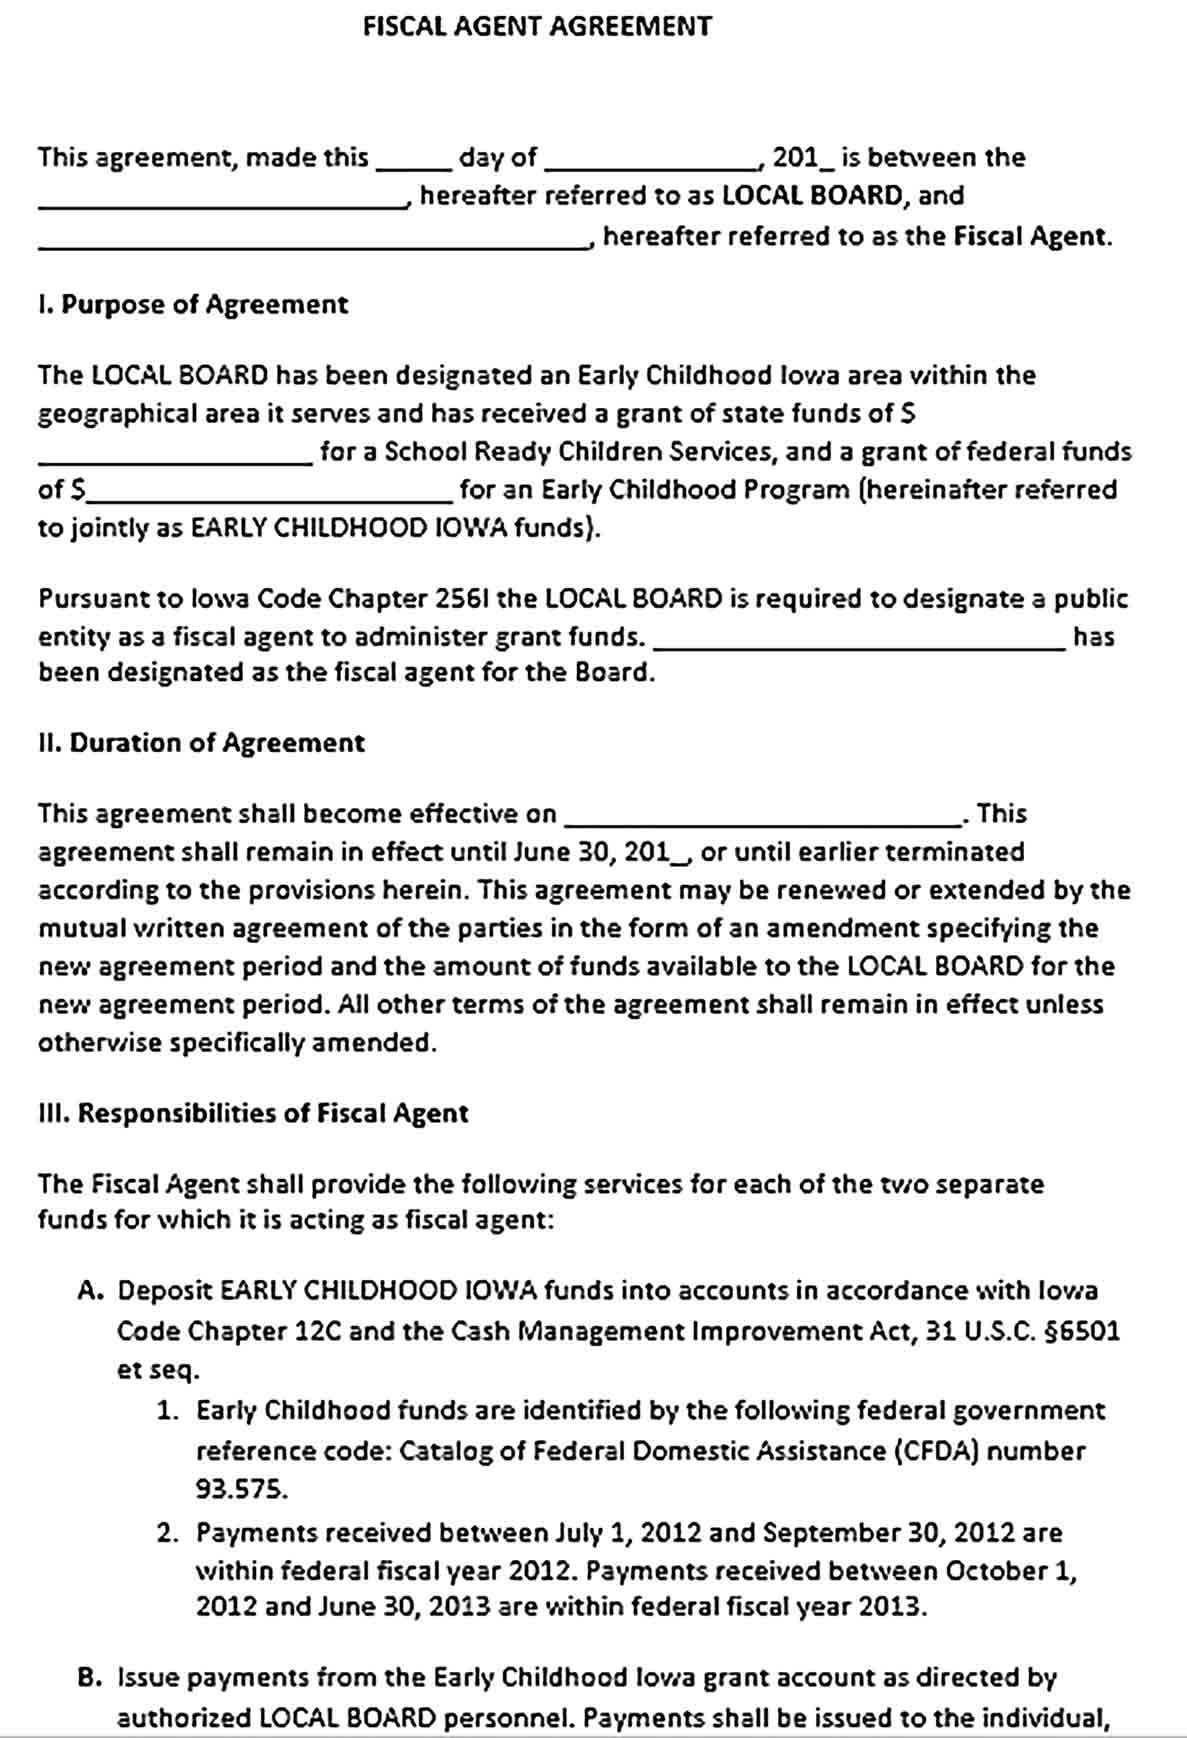 Sample Fiscal Agent Agreement